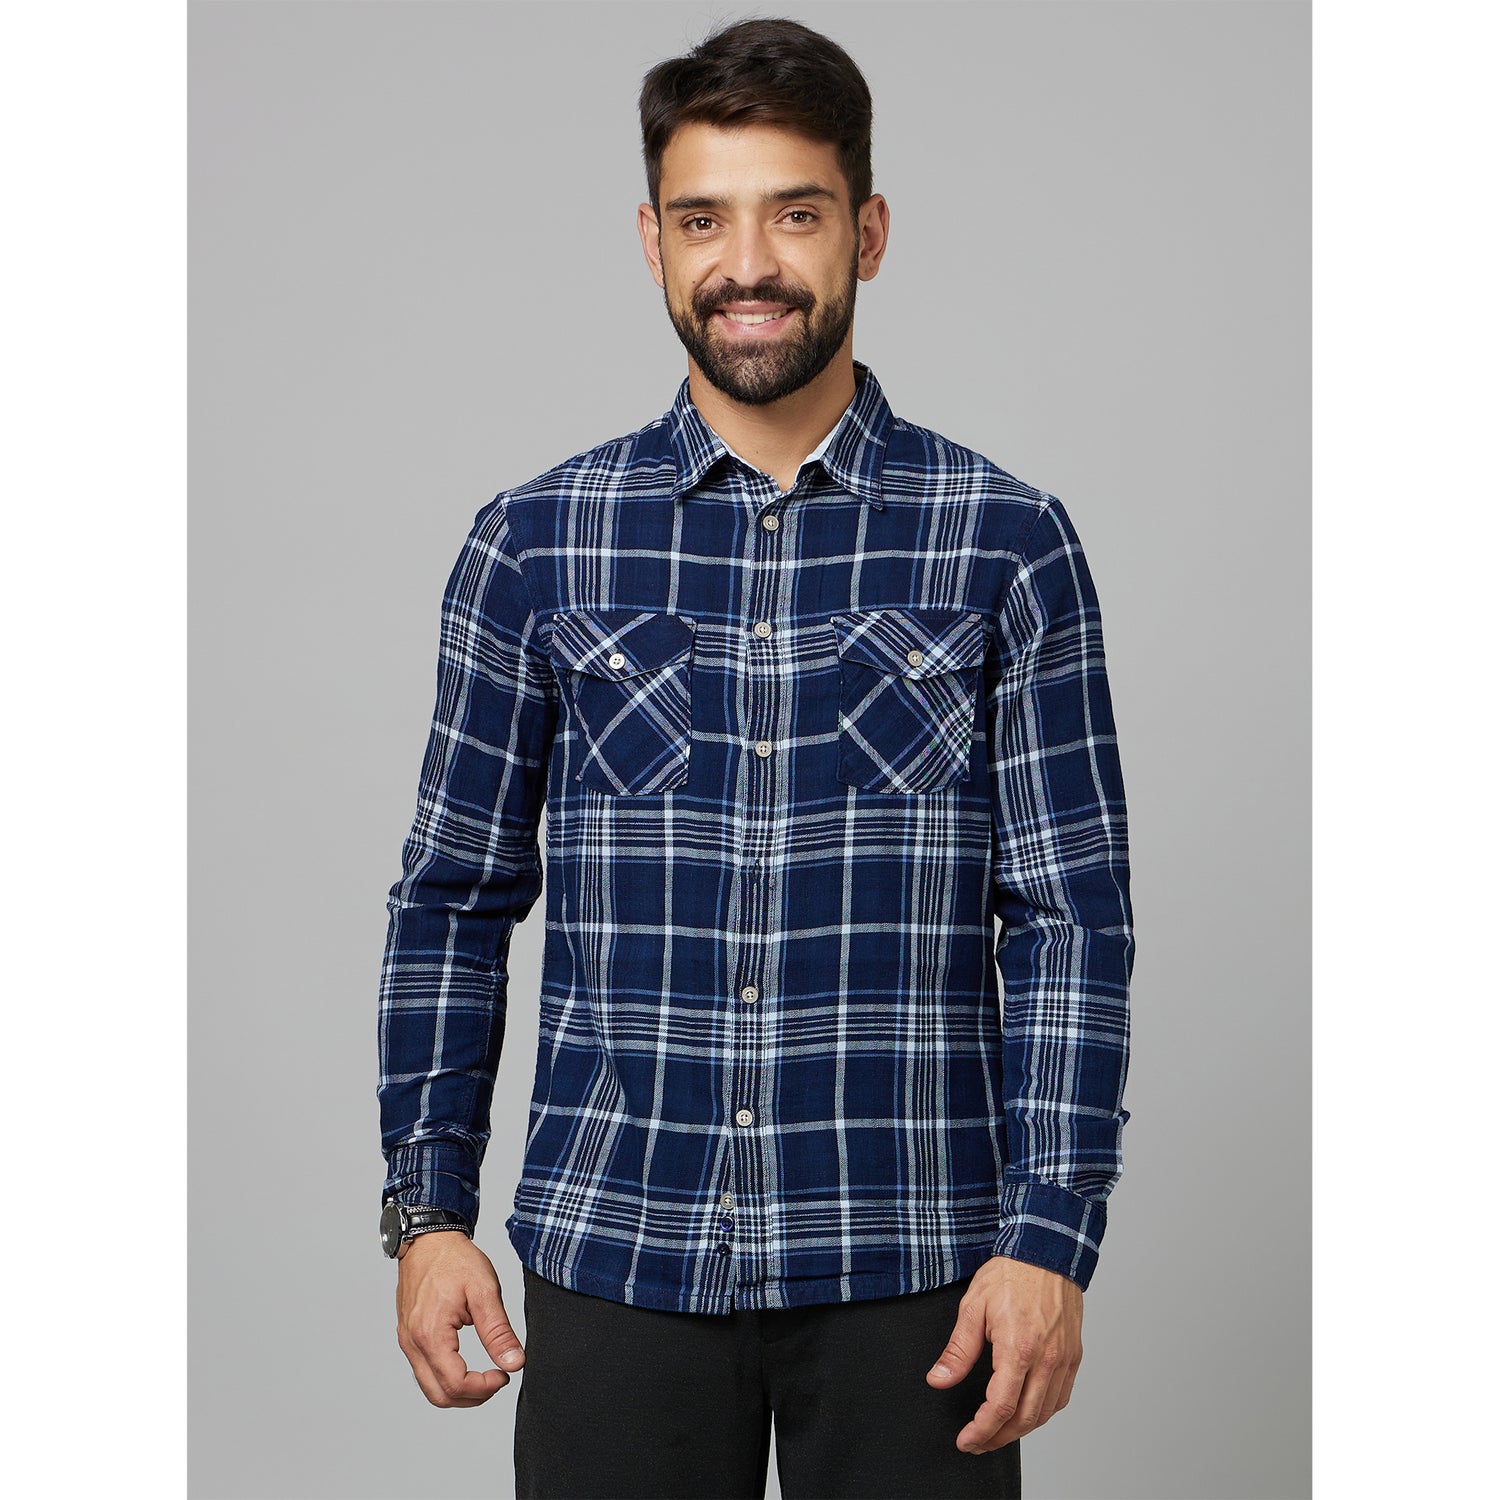 Navy Blue Slim Fit Checked Casual Shirt (CAPLAY1)